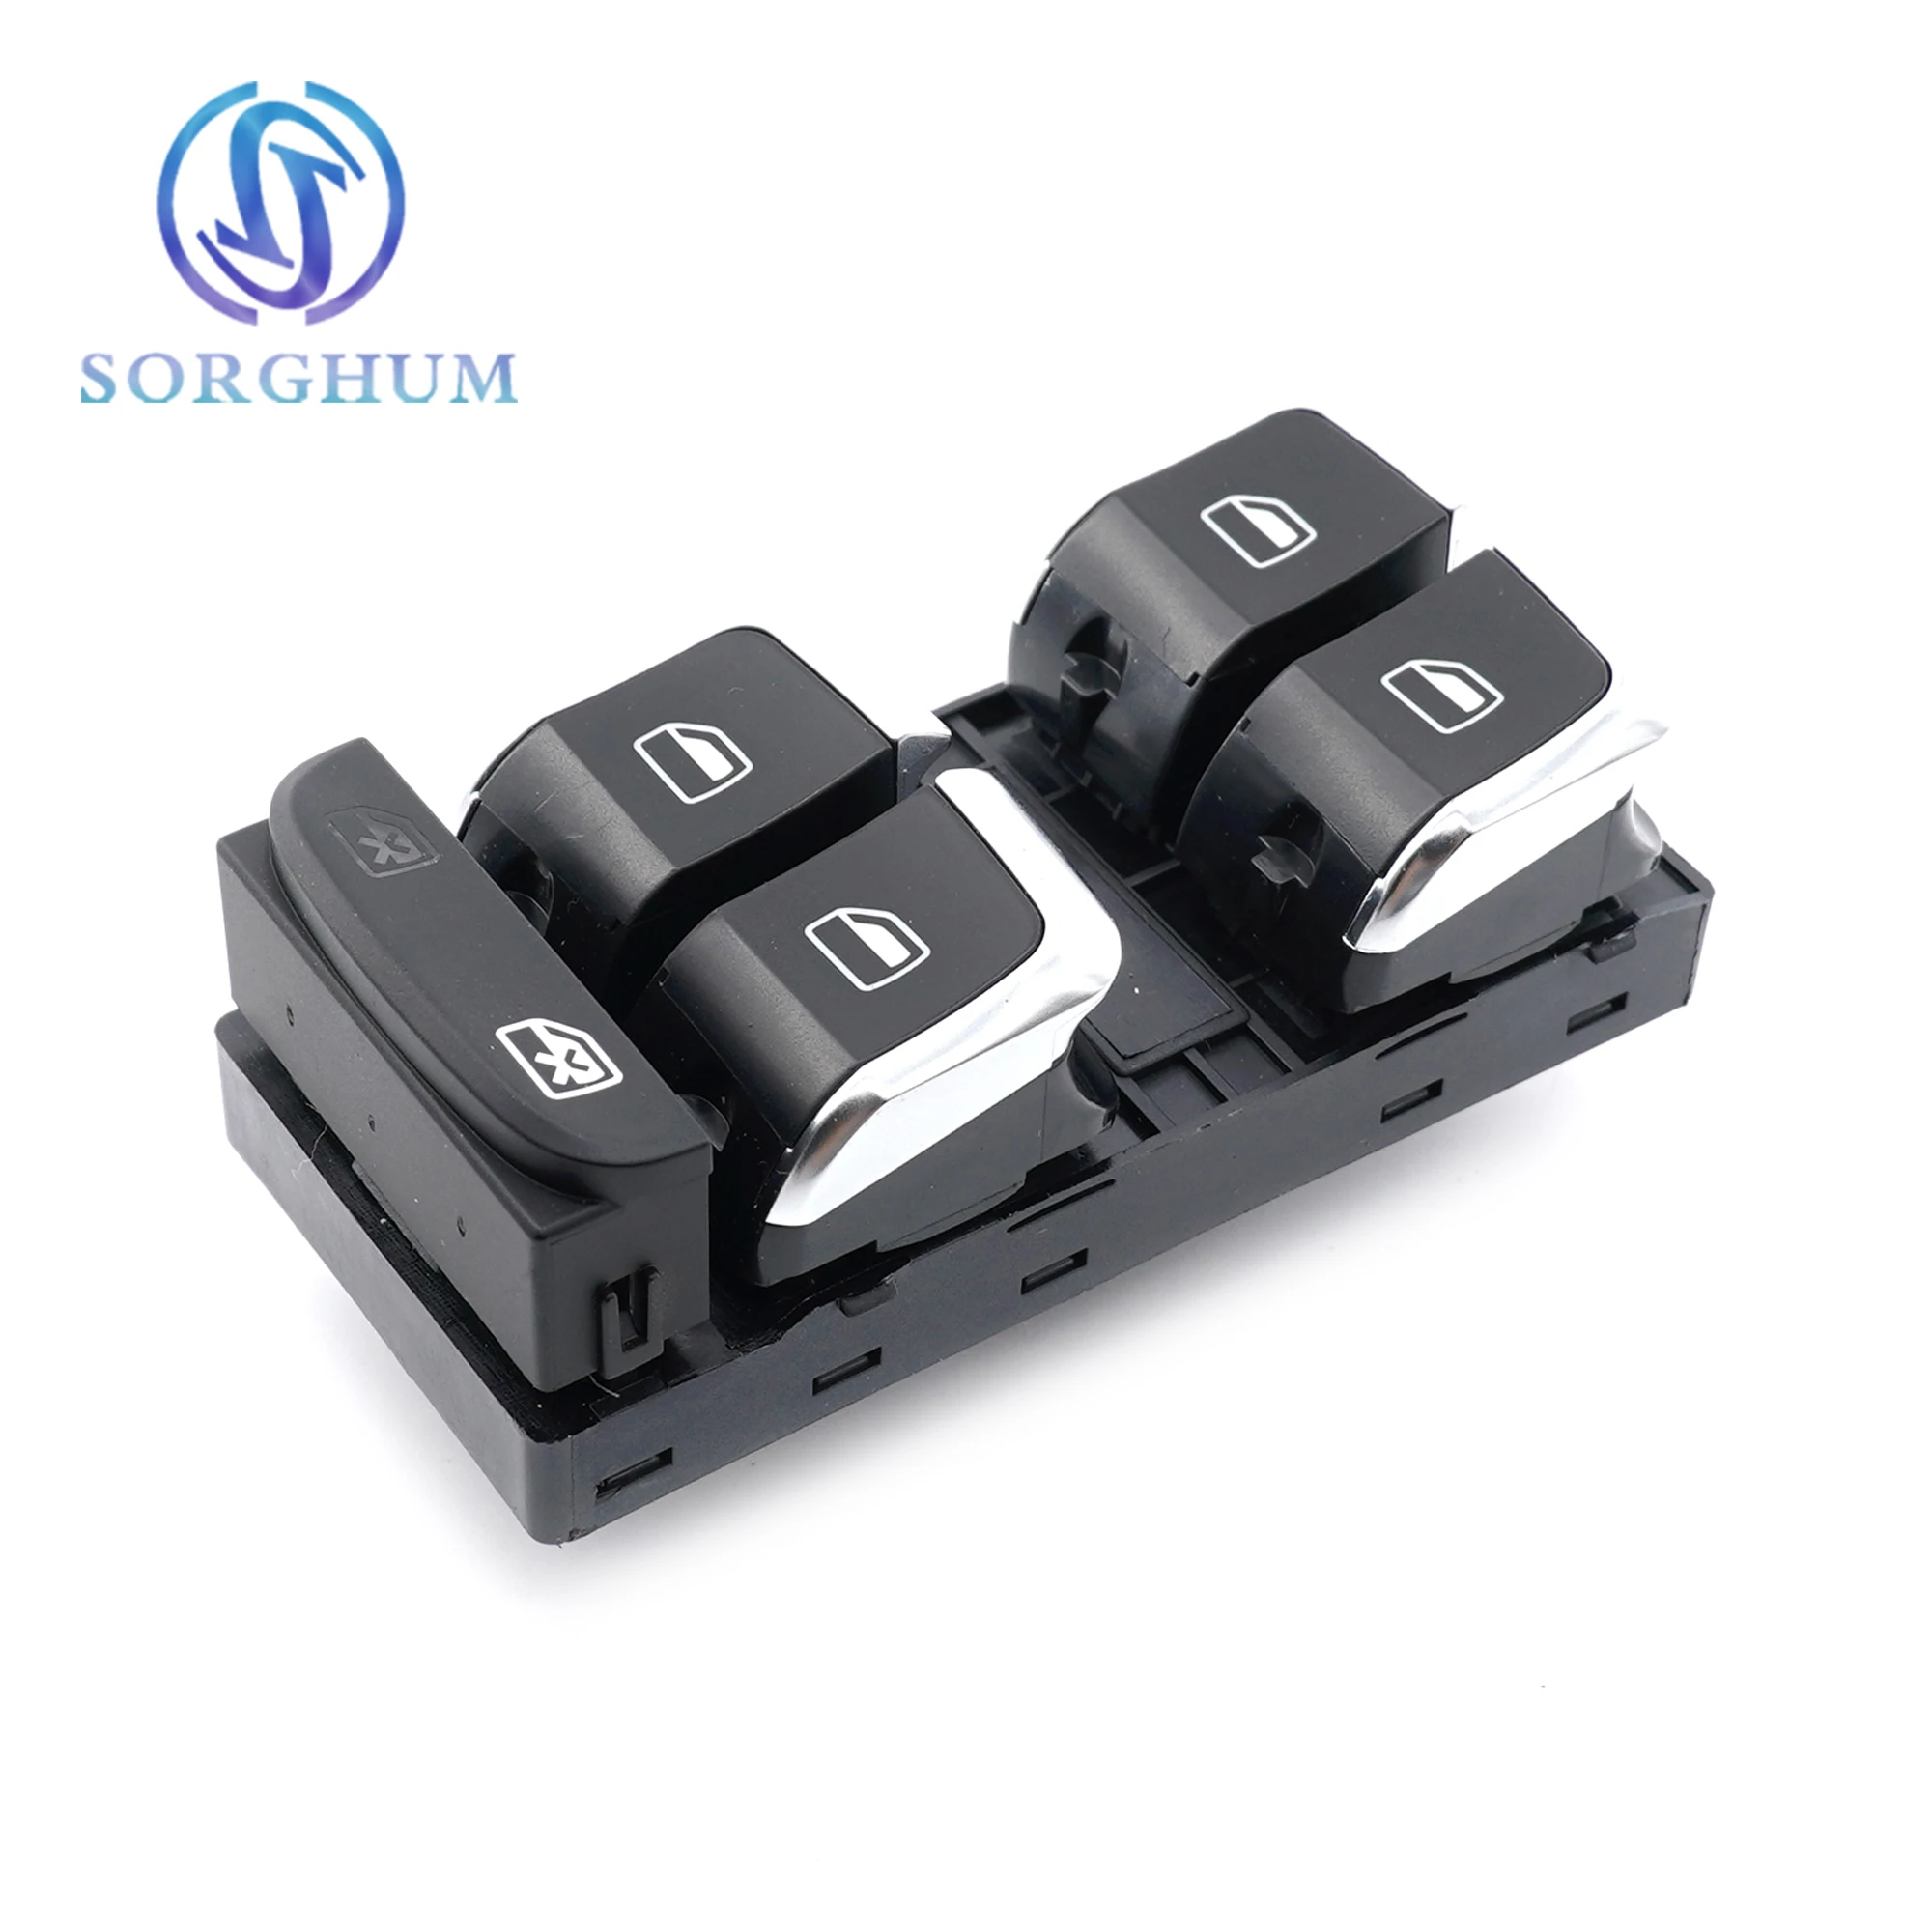 

Sorghum 8KD959851A 8K0959851F Driver Side Electric Master Power Window Lifter Control Switch Button For Audi A4 S4 Q5 B8 Allroad